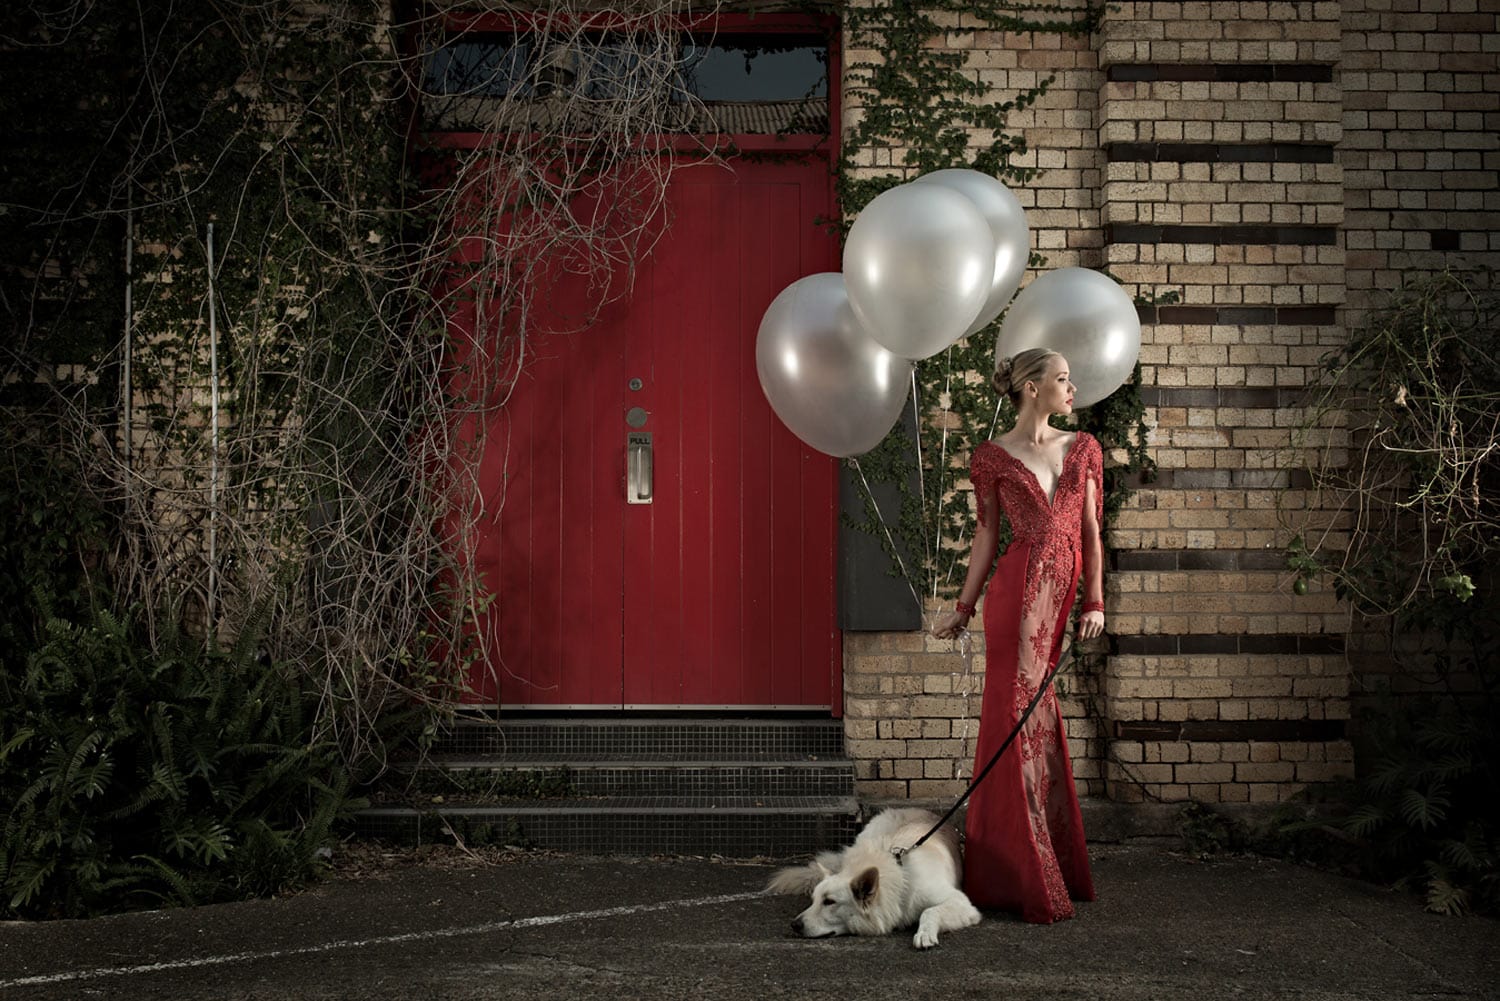 fashion photography woman with balloons